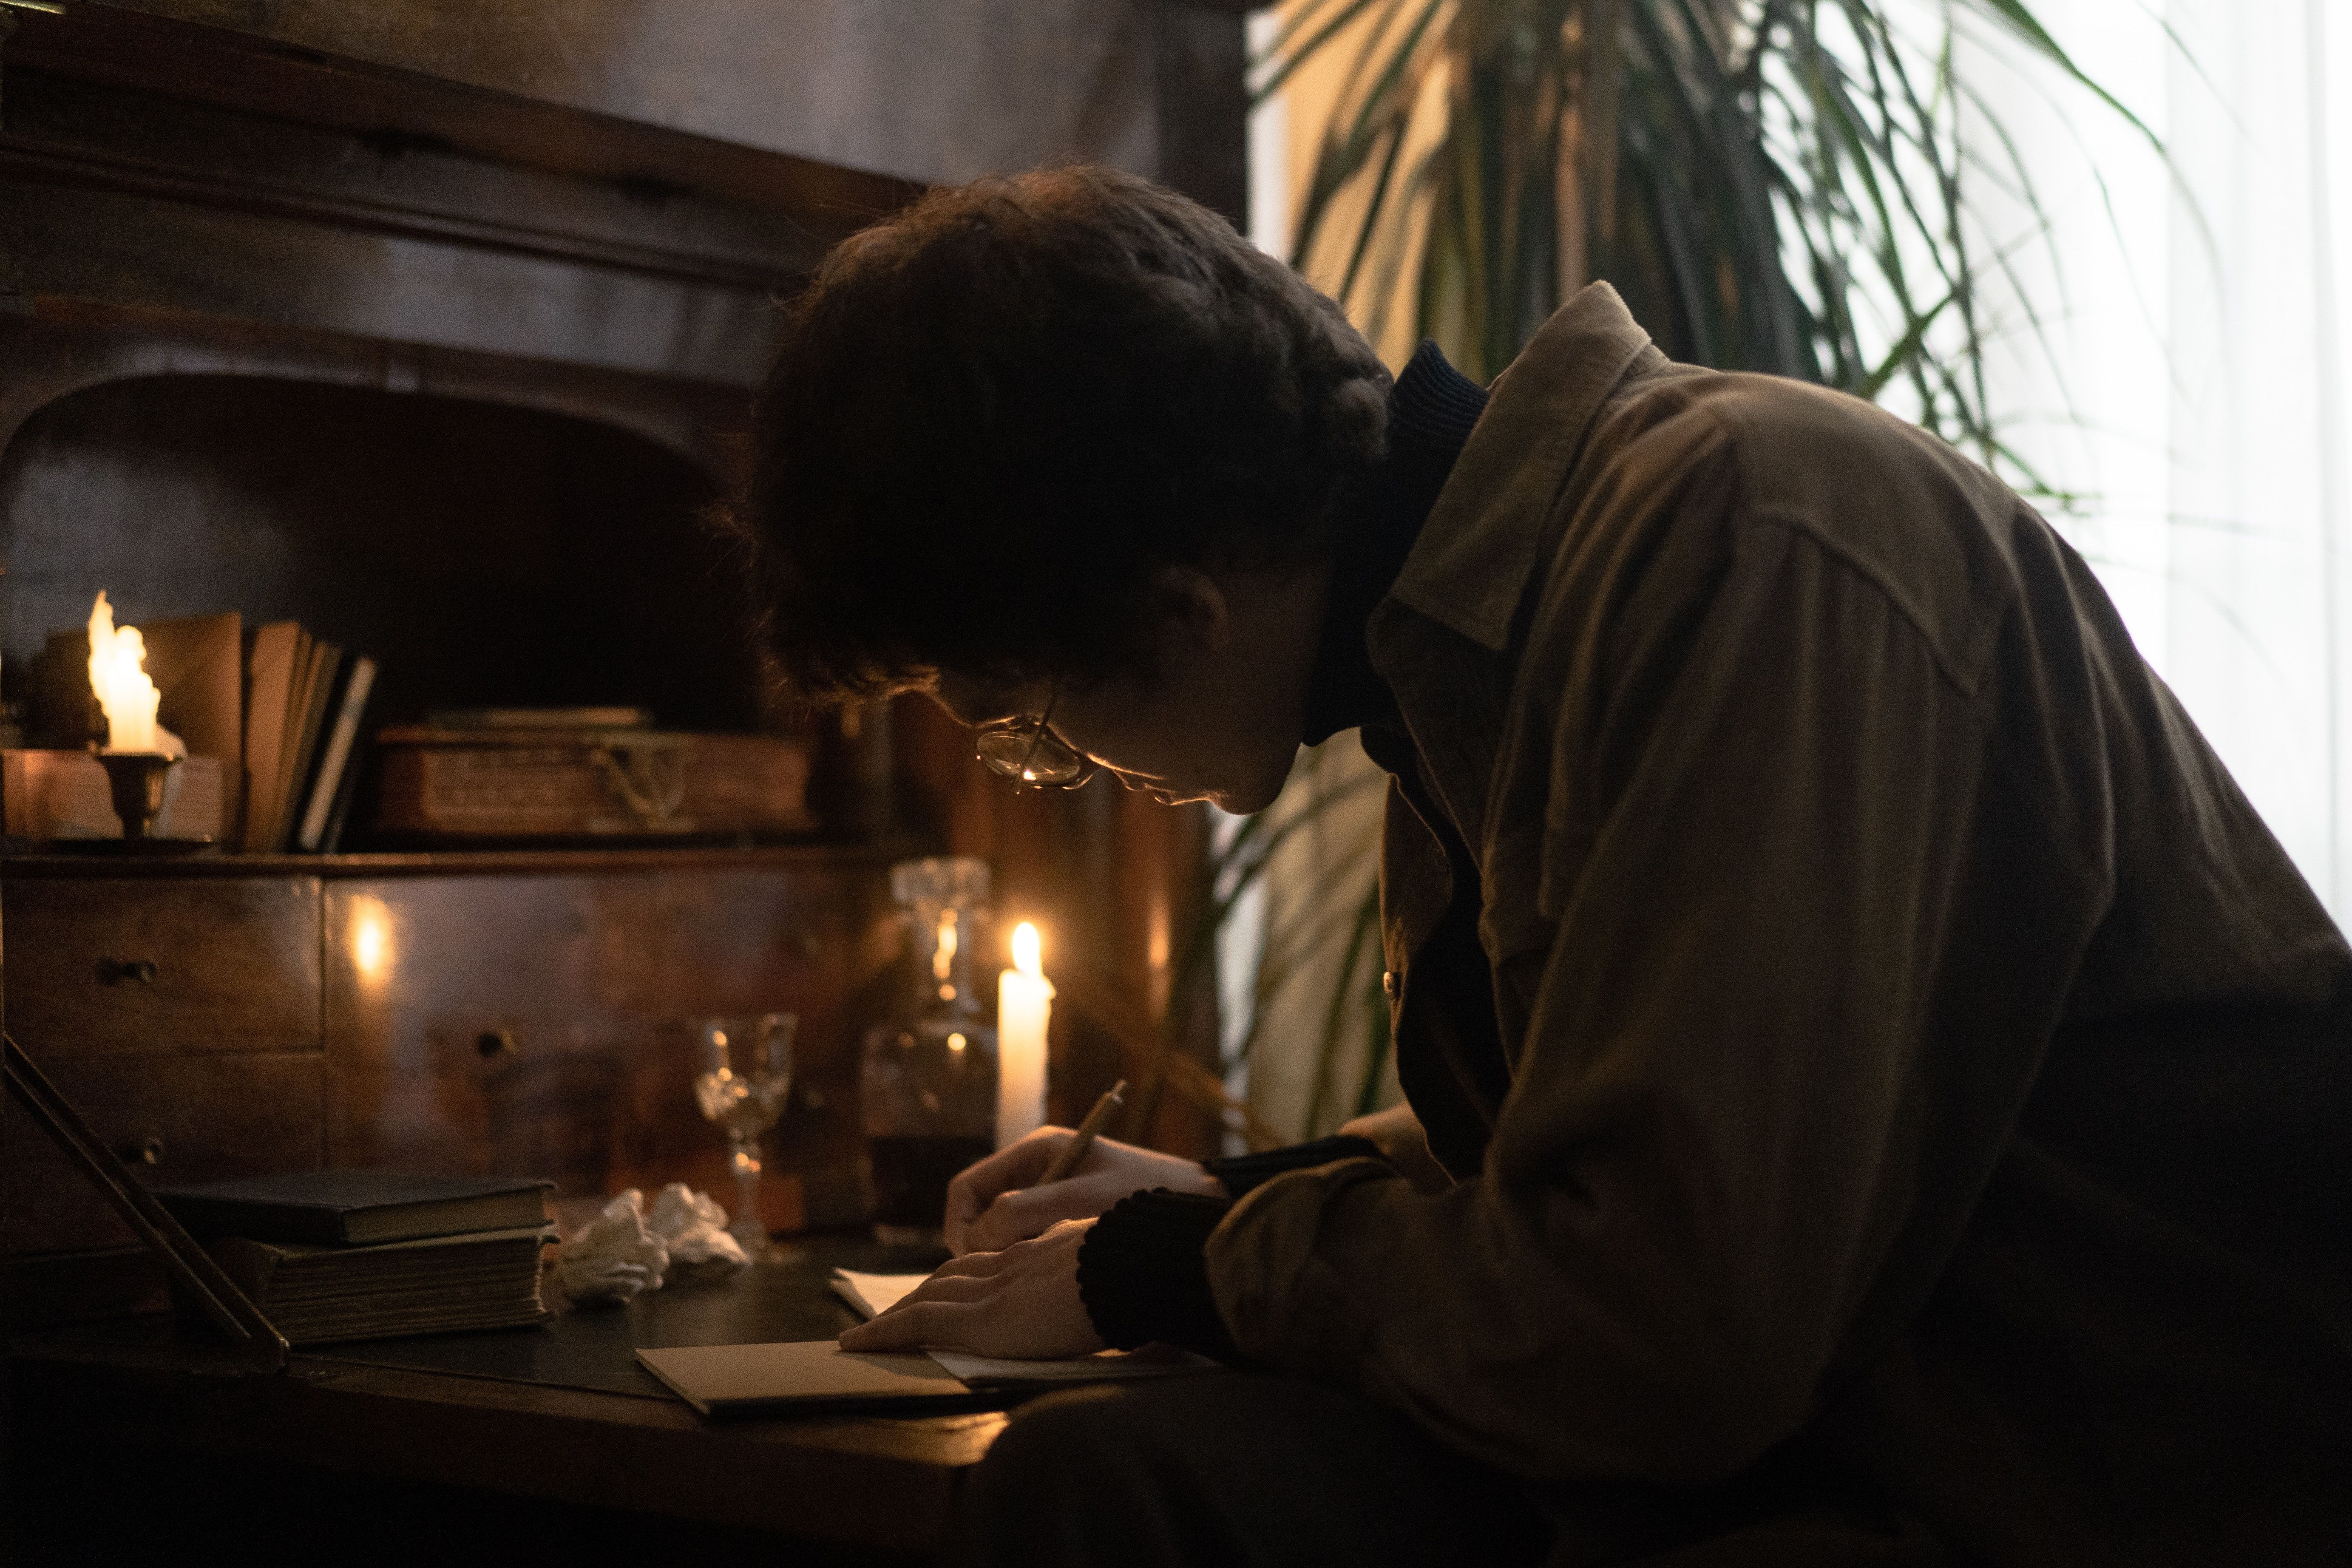 A man writing in a journal by candlelight. - Dark academia